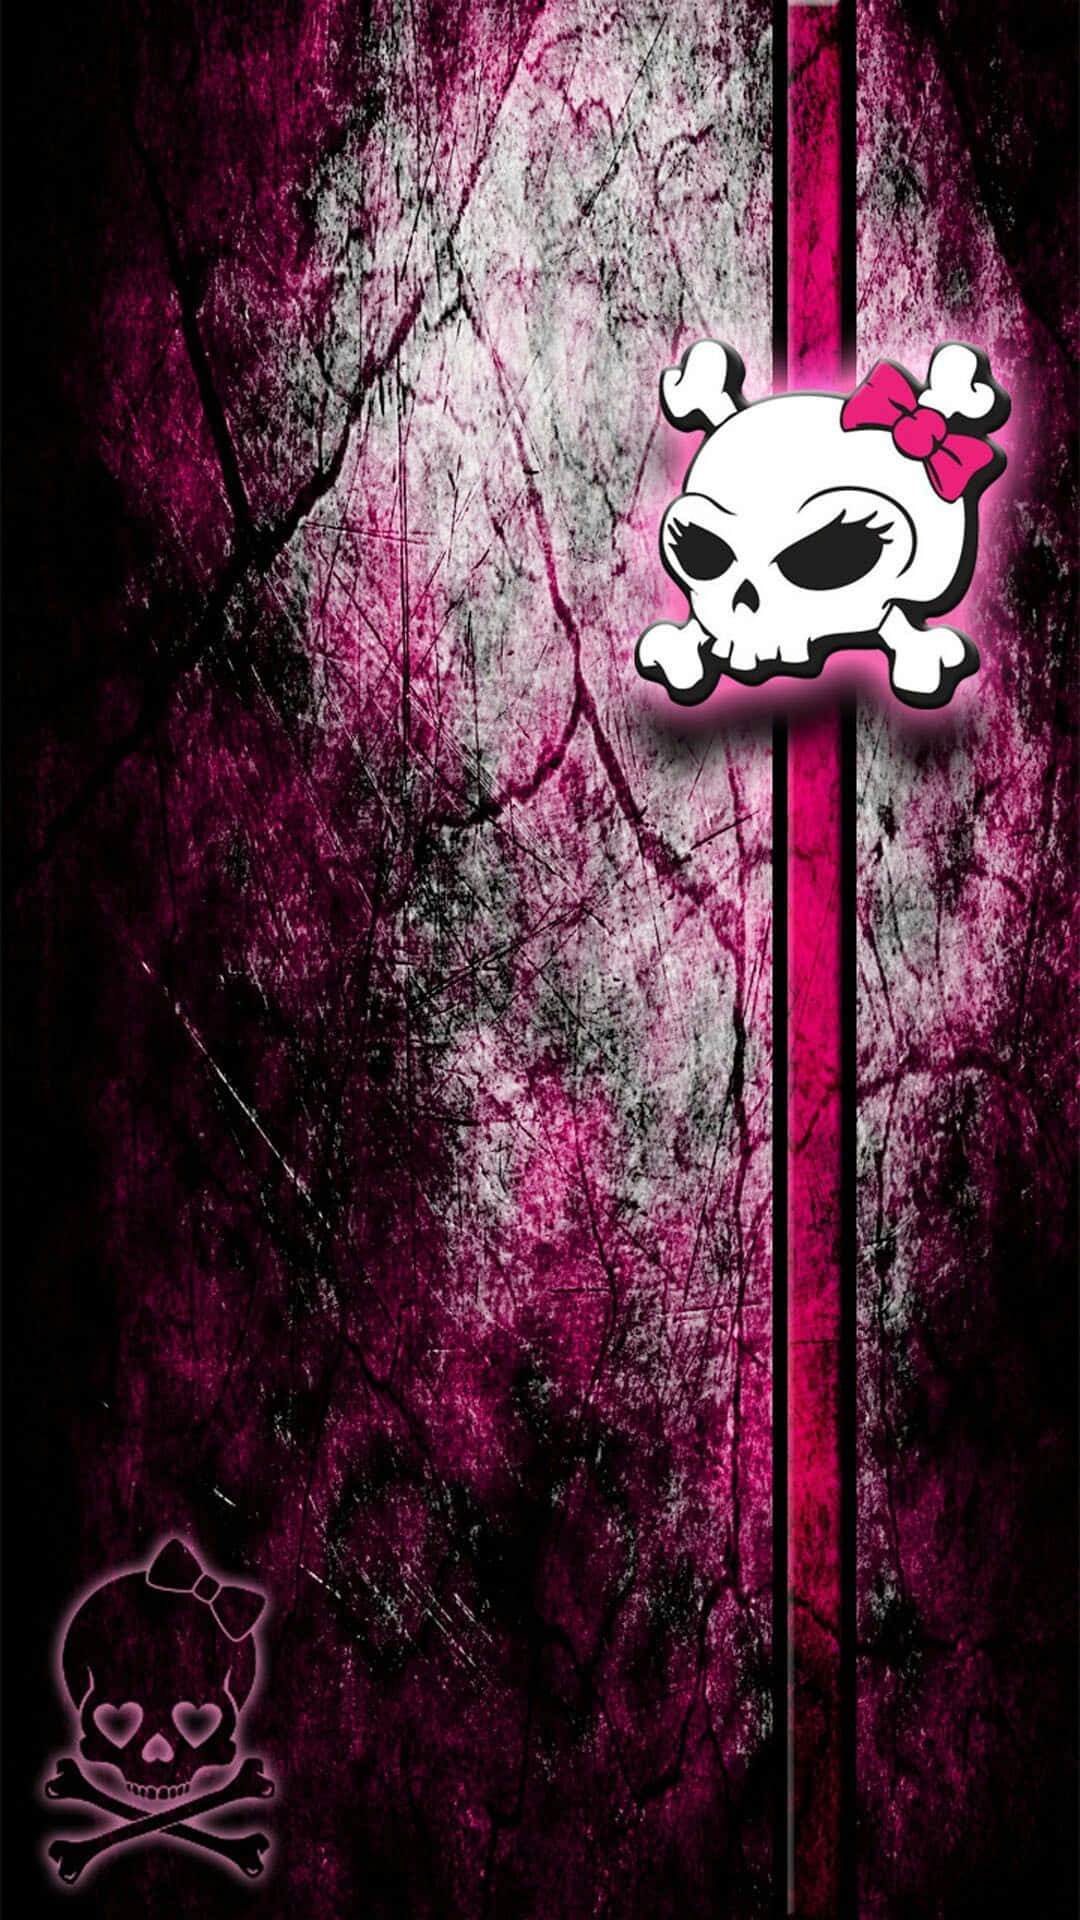 "Let your unique personality show through with Girly Skull!” Wallpaper